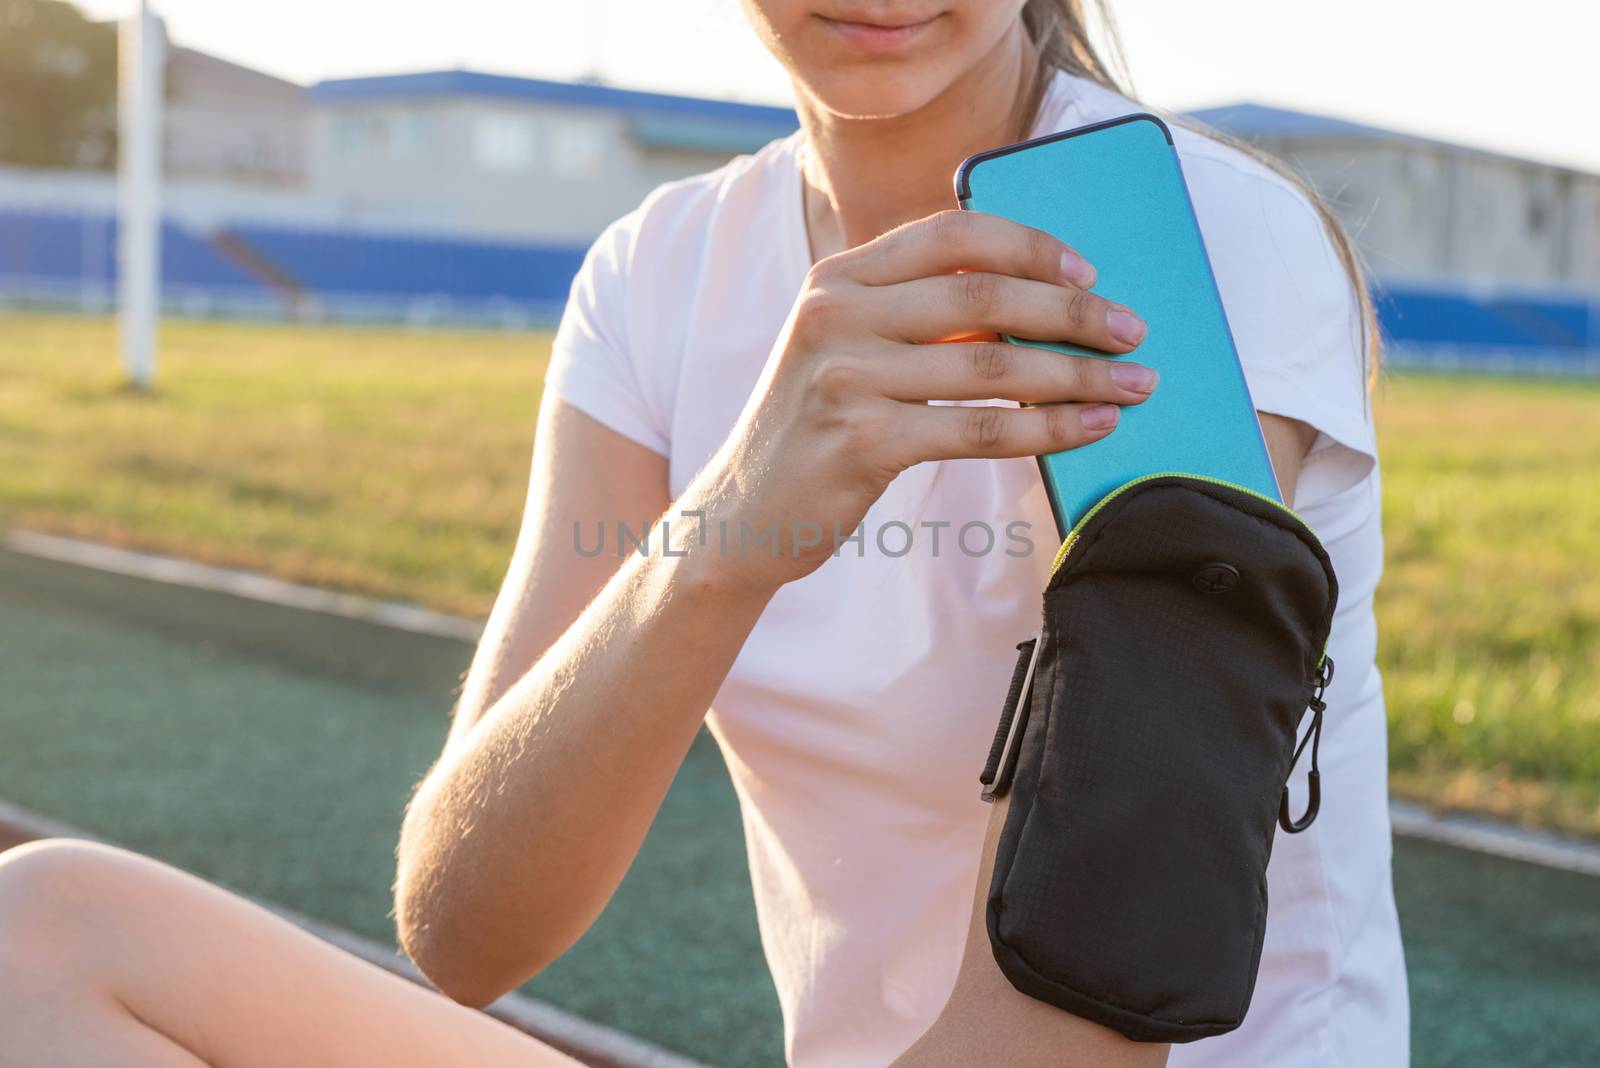 Teenage girl sitting at the stadium after working out putting her mobile phone to the pocket by Desperada